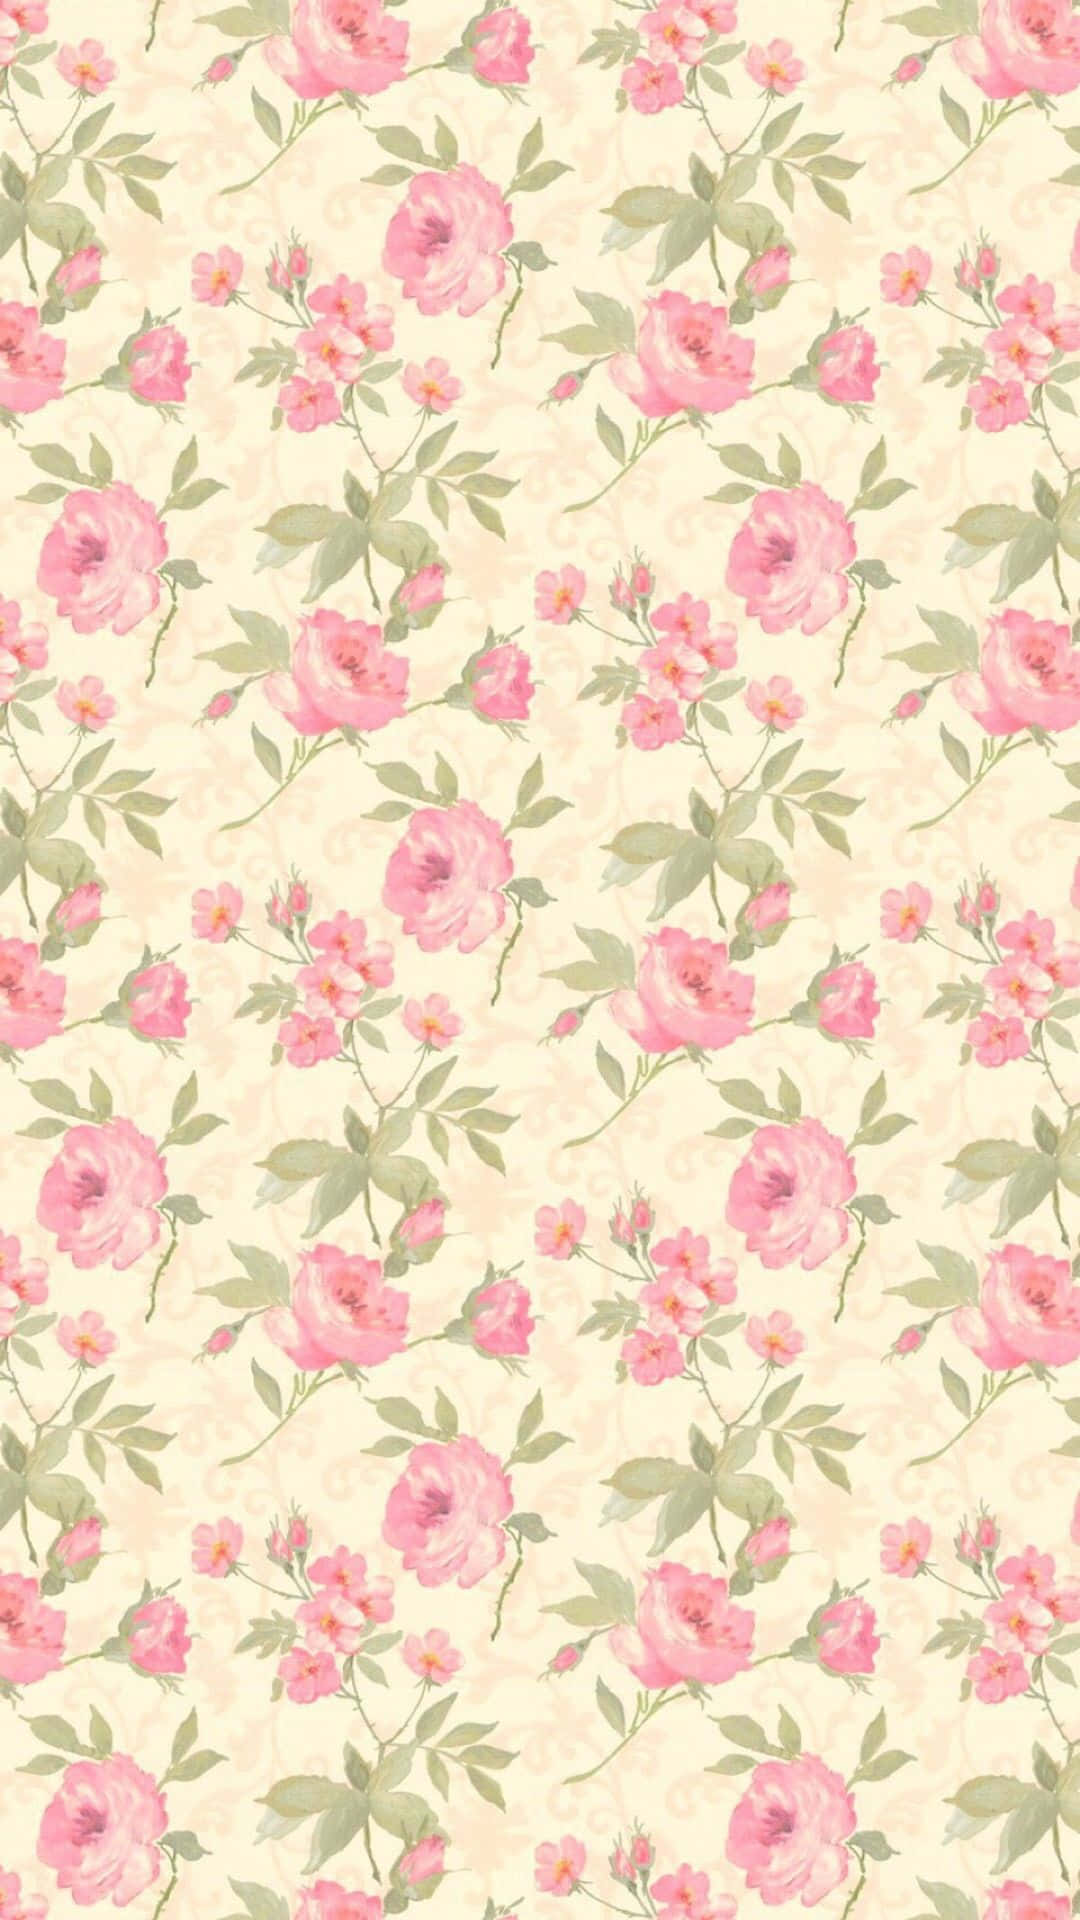 Cute Pink Floral Pattern On Beige Background